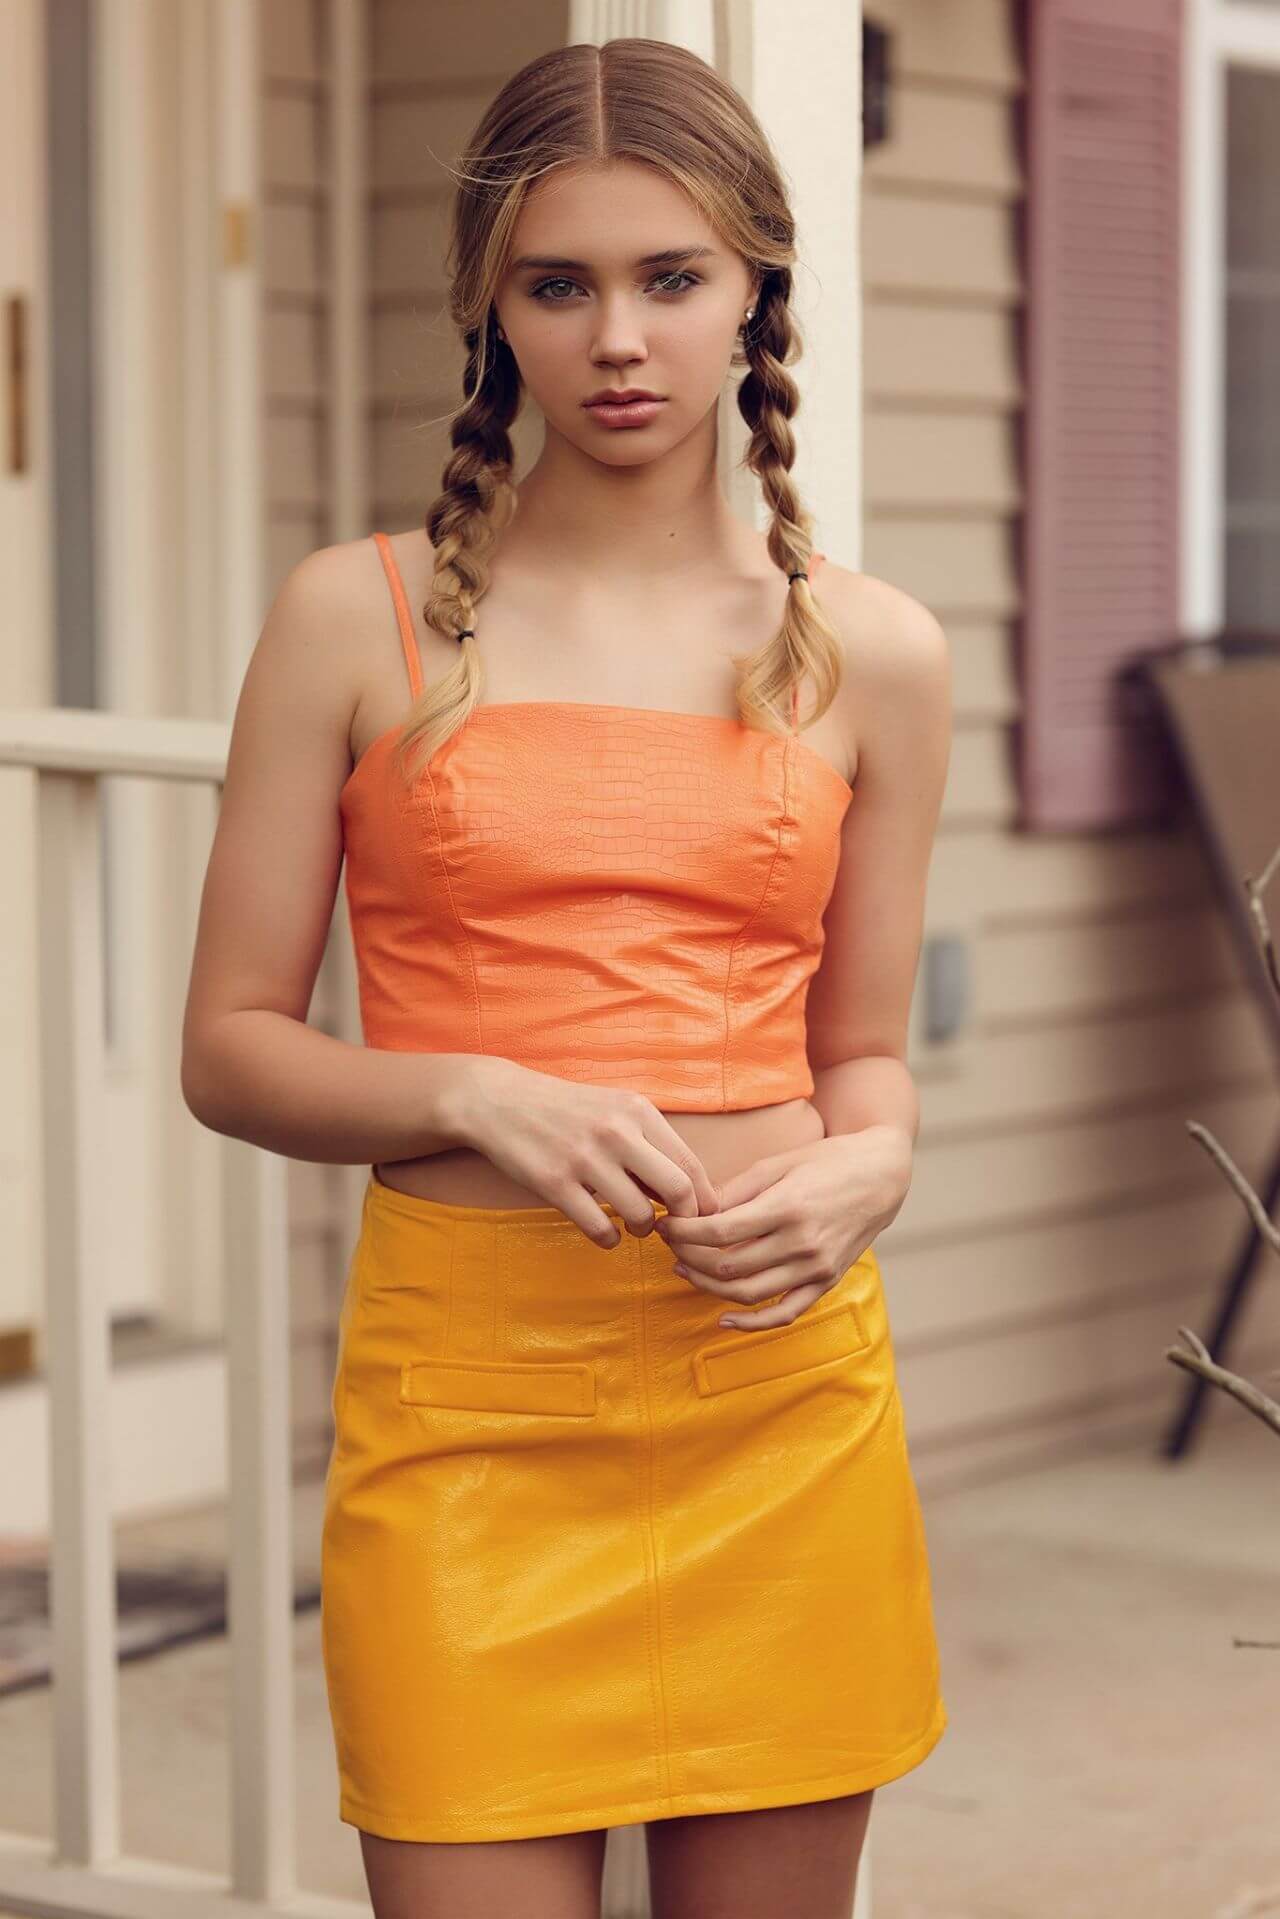 Angelina Polikarpova In Orange Strap Sleeves Crop Top With Yellow Leather Mini Skirt Outfits